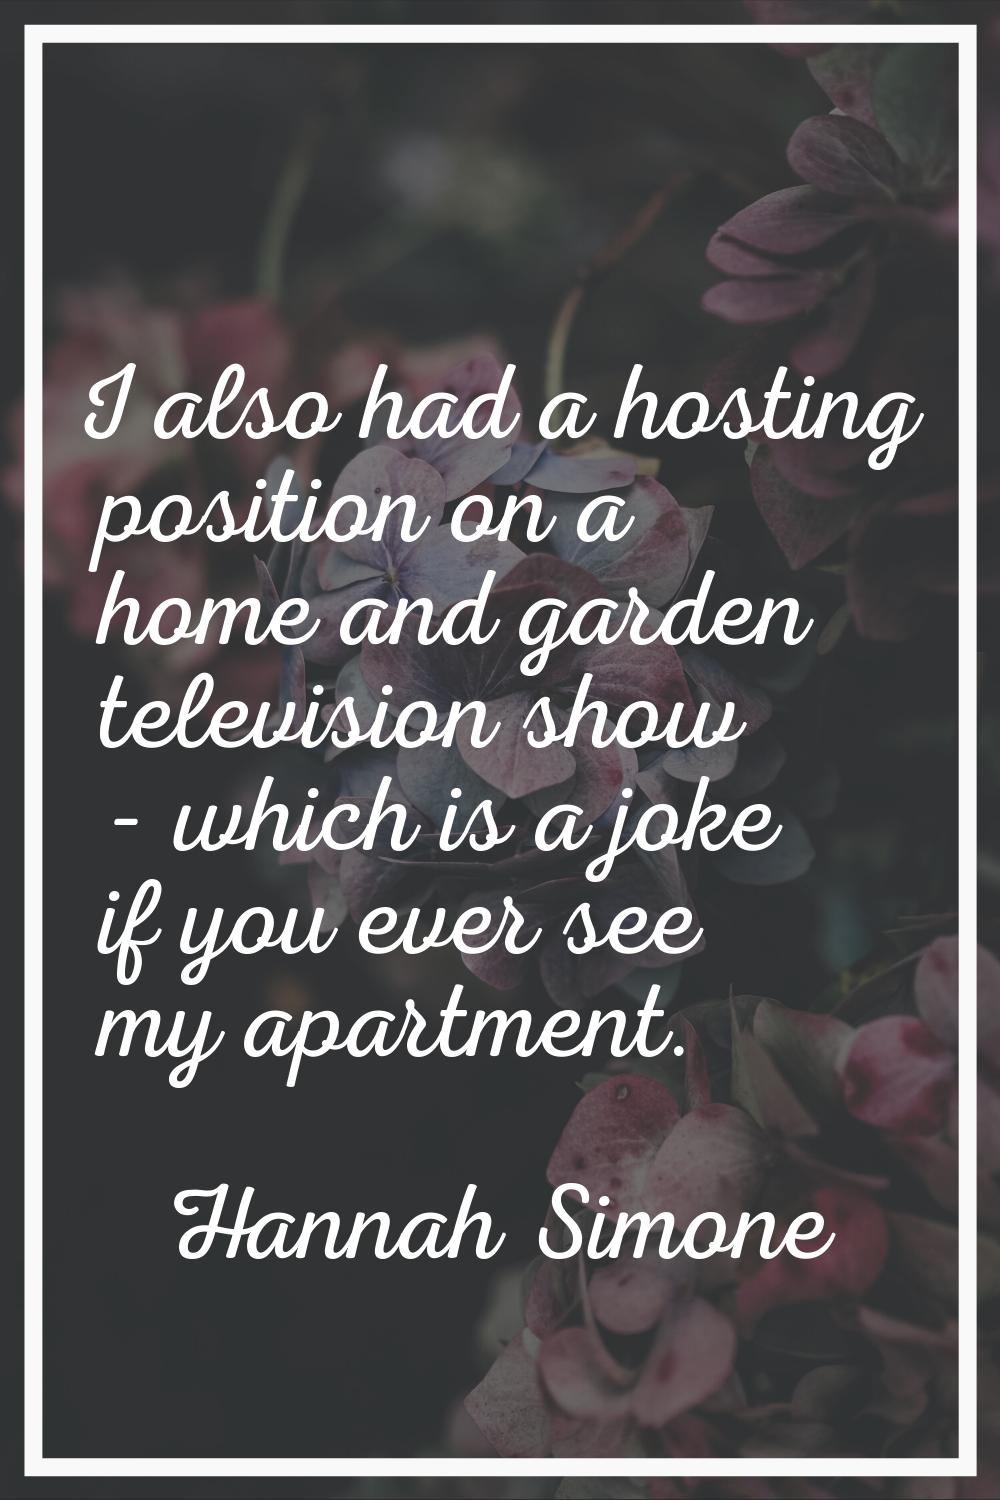 I also had a hosting position on a home and garden television show - which is a joke if you ever se